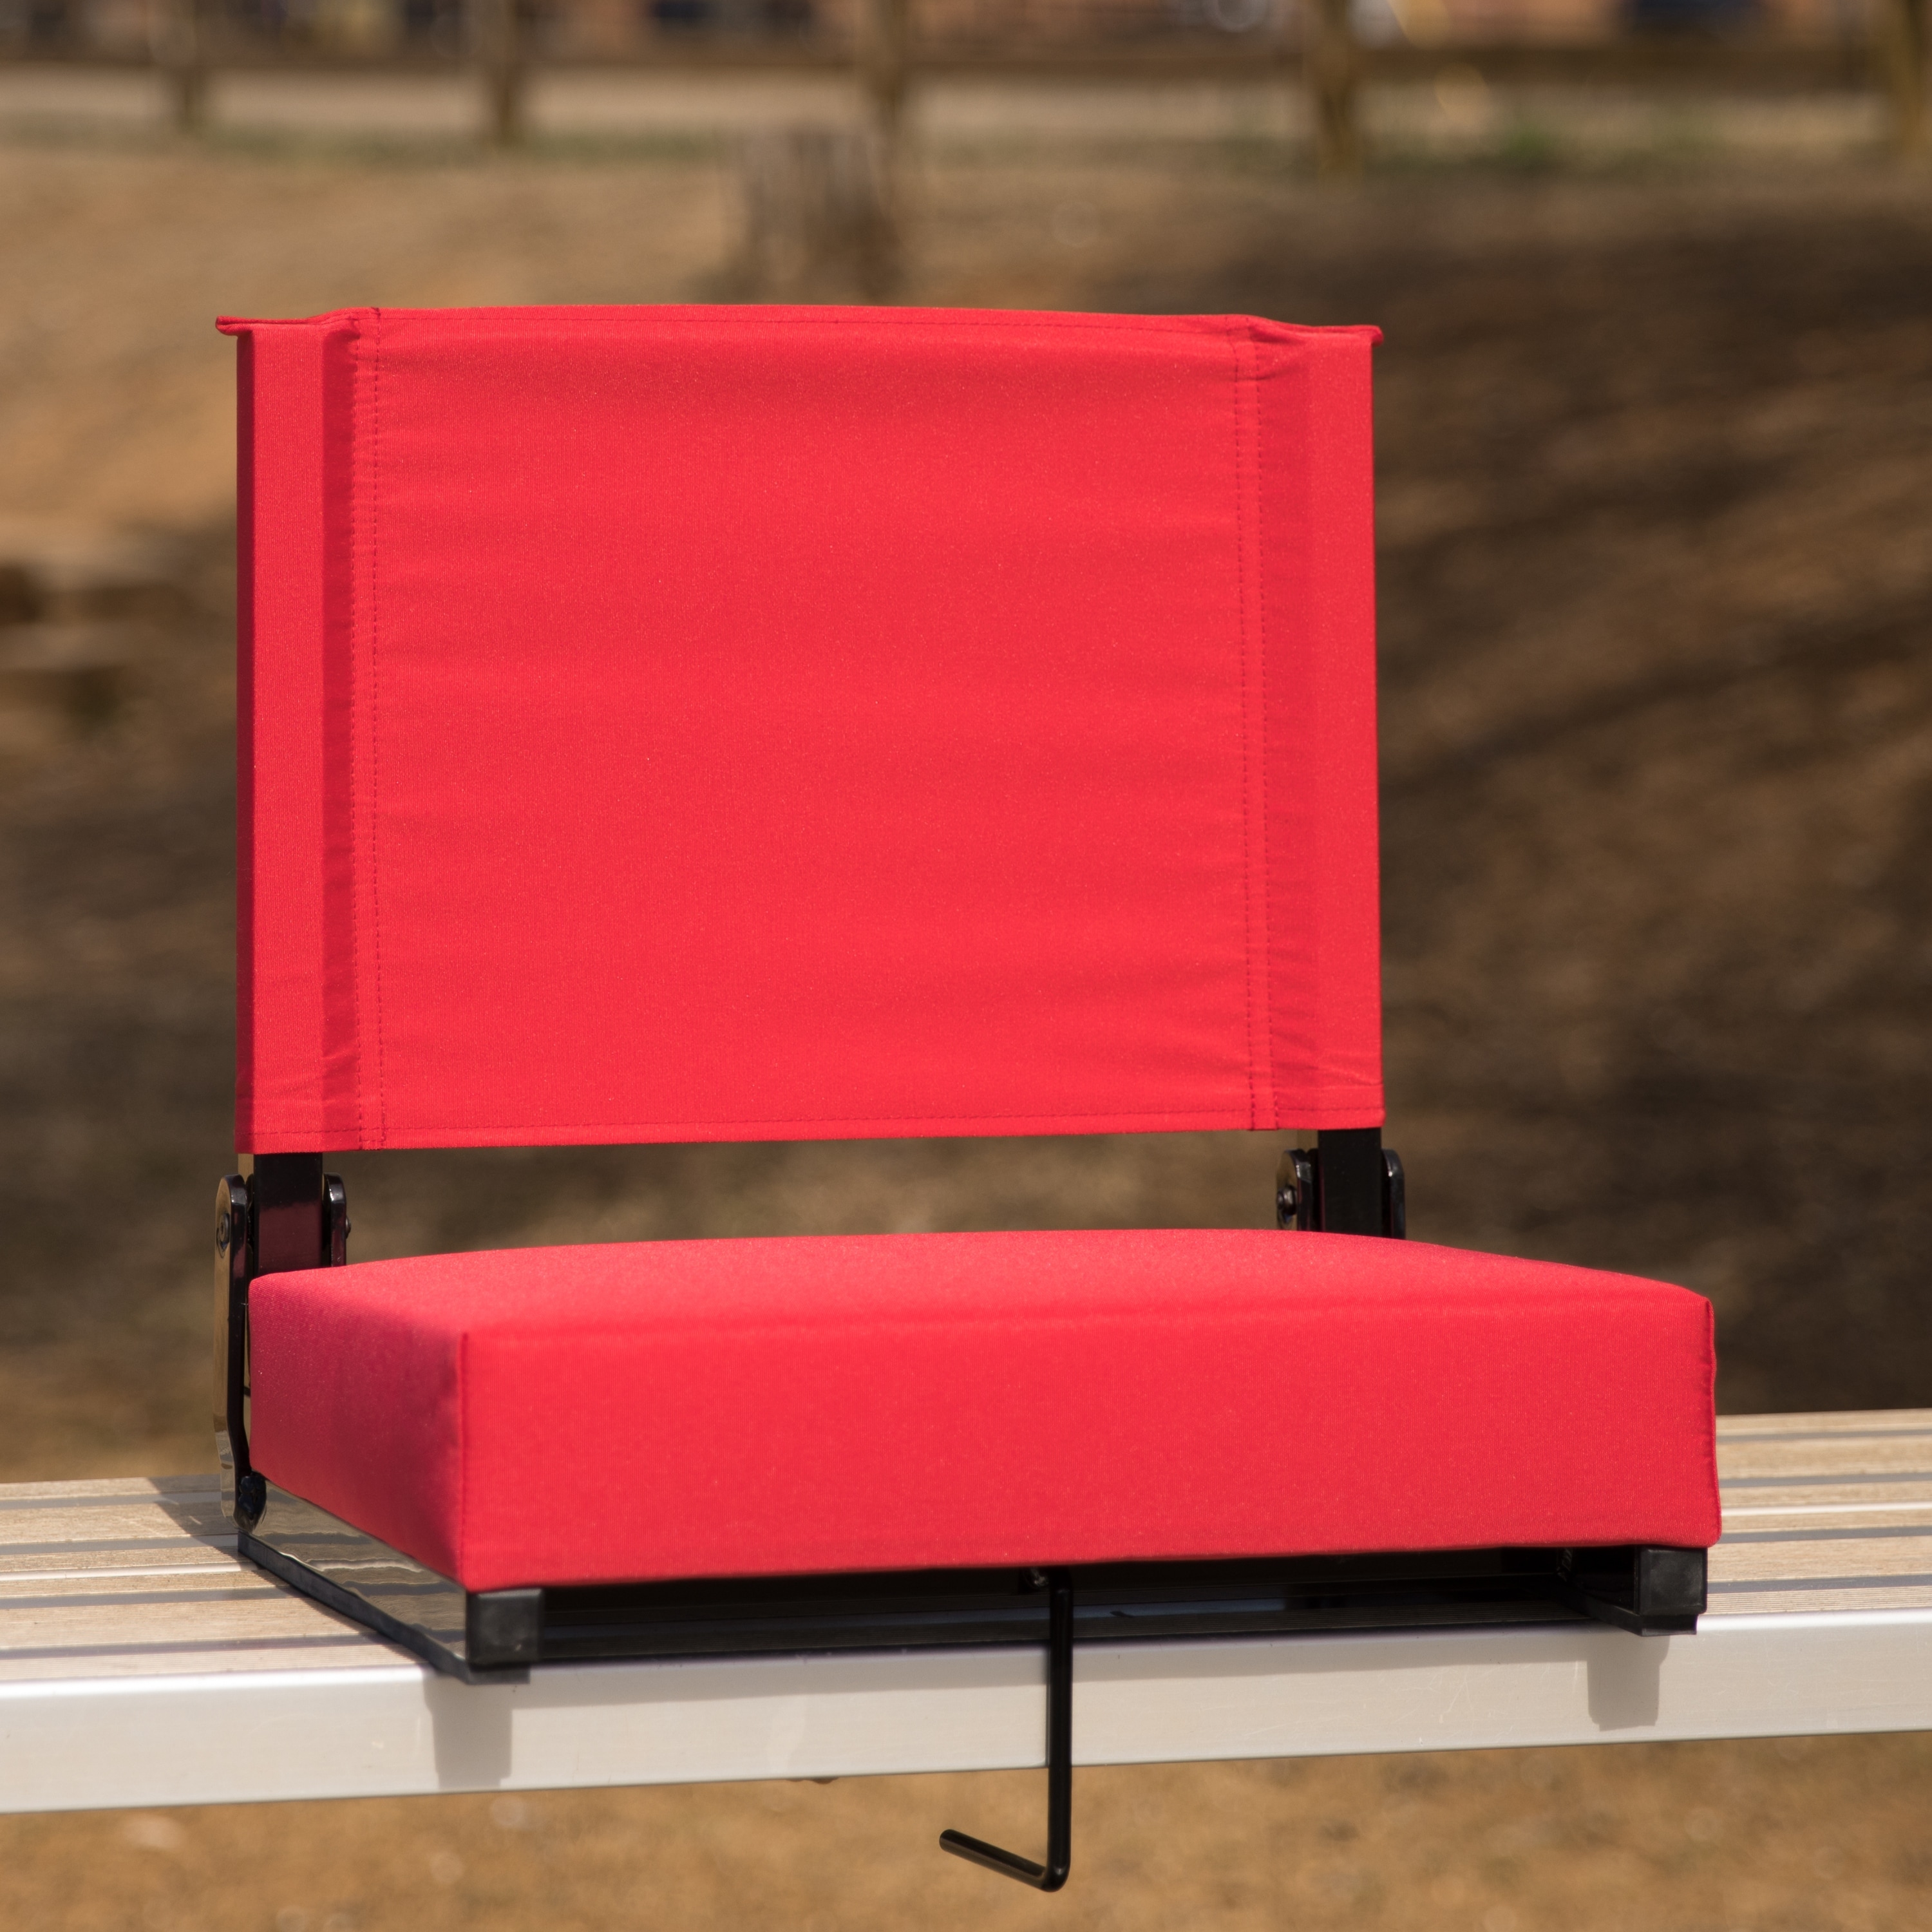 Folding Portable Stadium Bleacher Cushion Chair Durable Padded Seat With  Back - Bed Bath & Beyond - 23038909